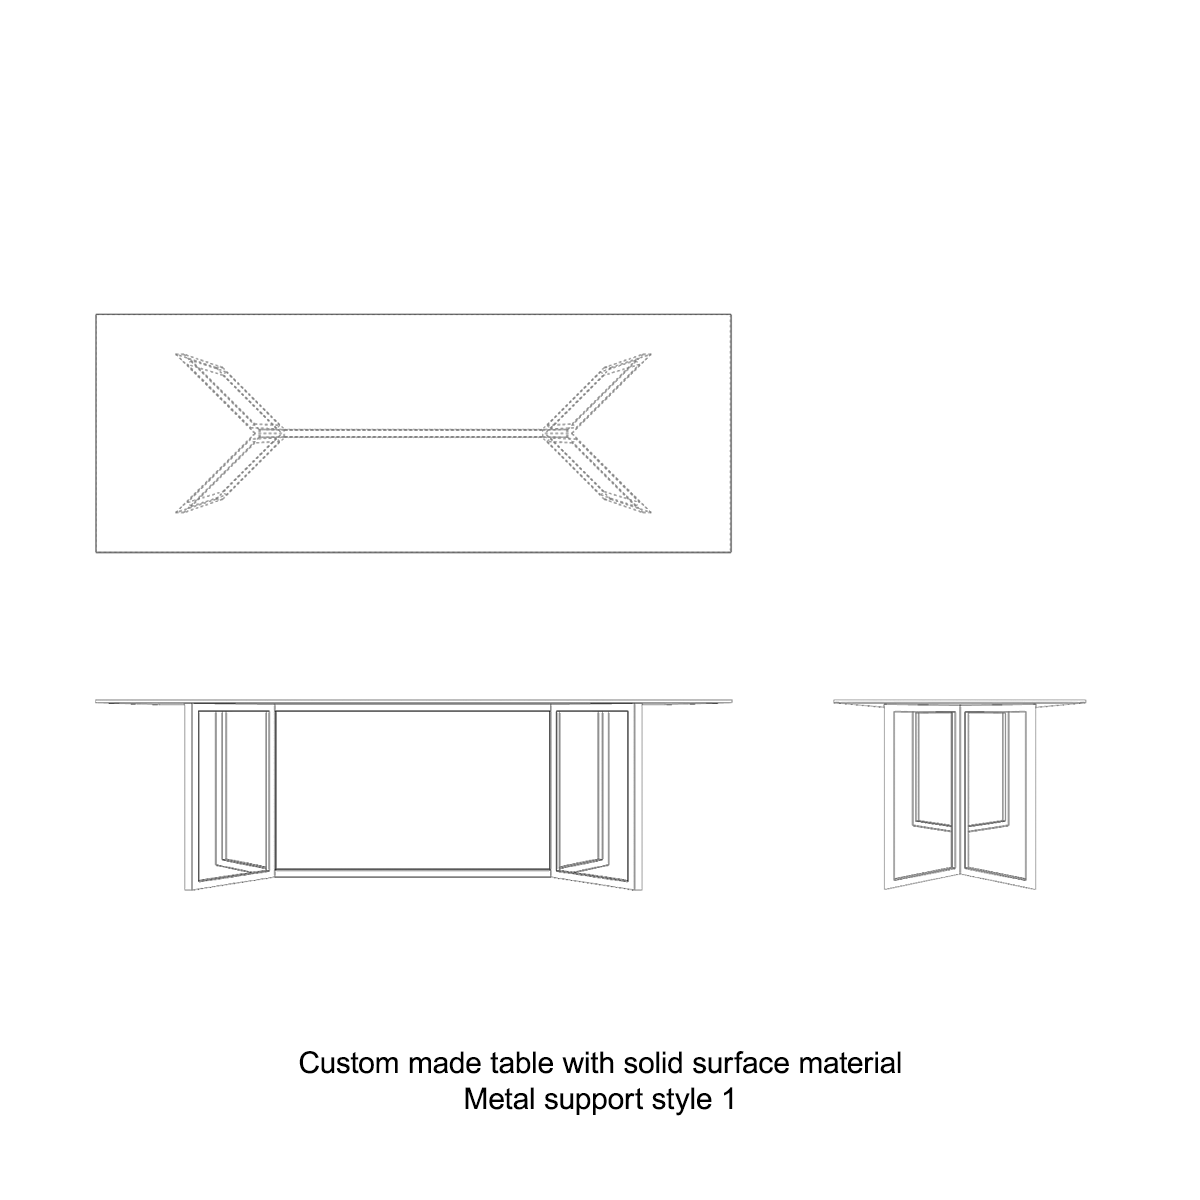 Custom-made Table with Solid Surface Materials 專業訂製餐桌 餐桌 使用耐刮耐磨廚房檯面材料